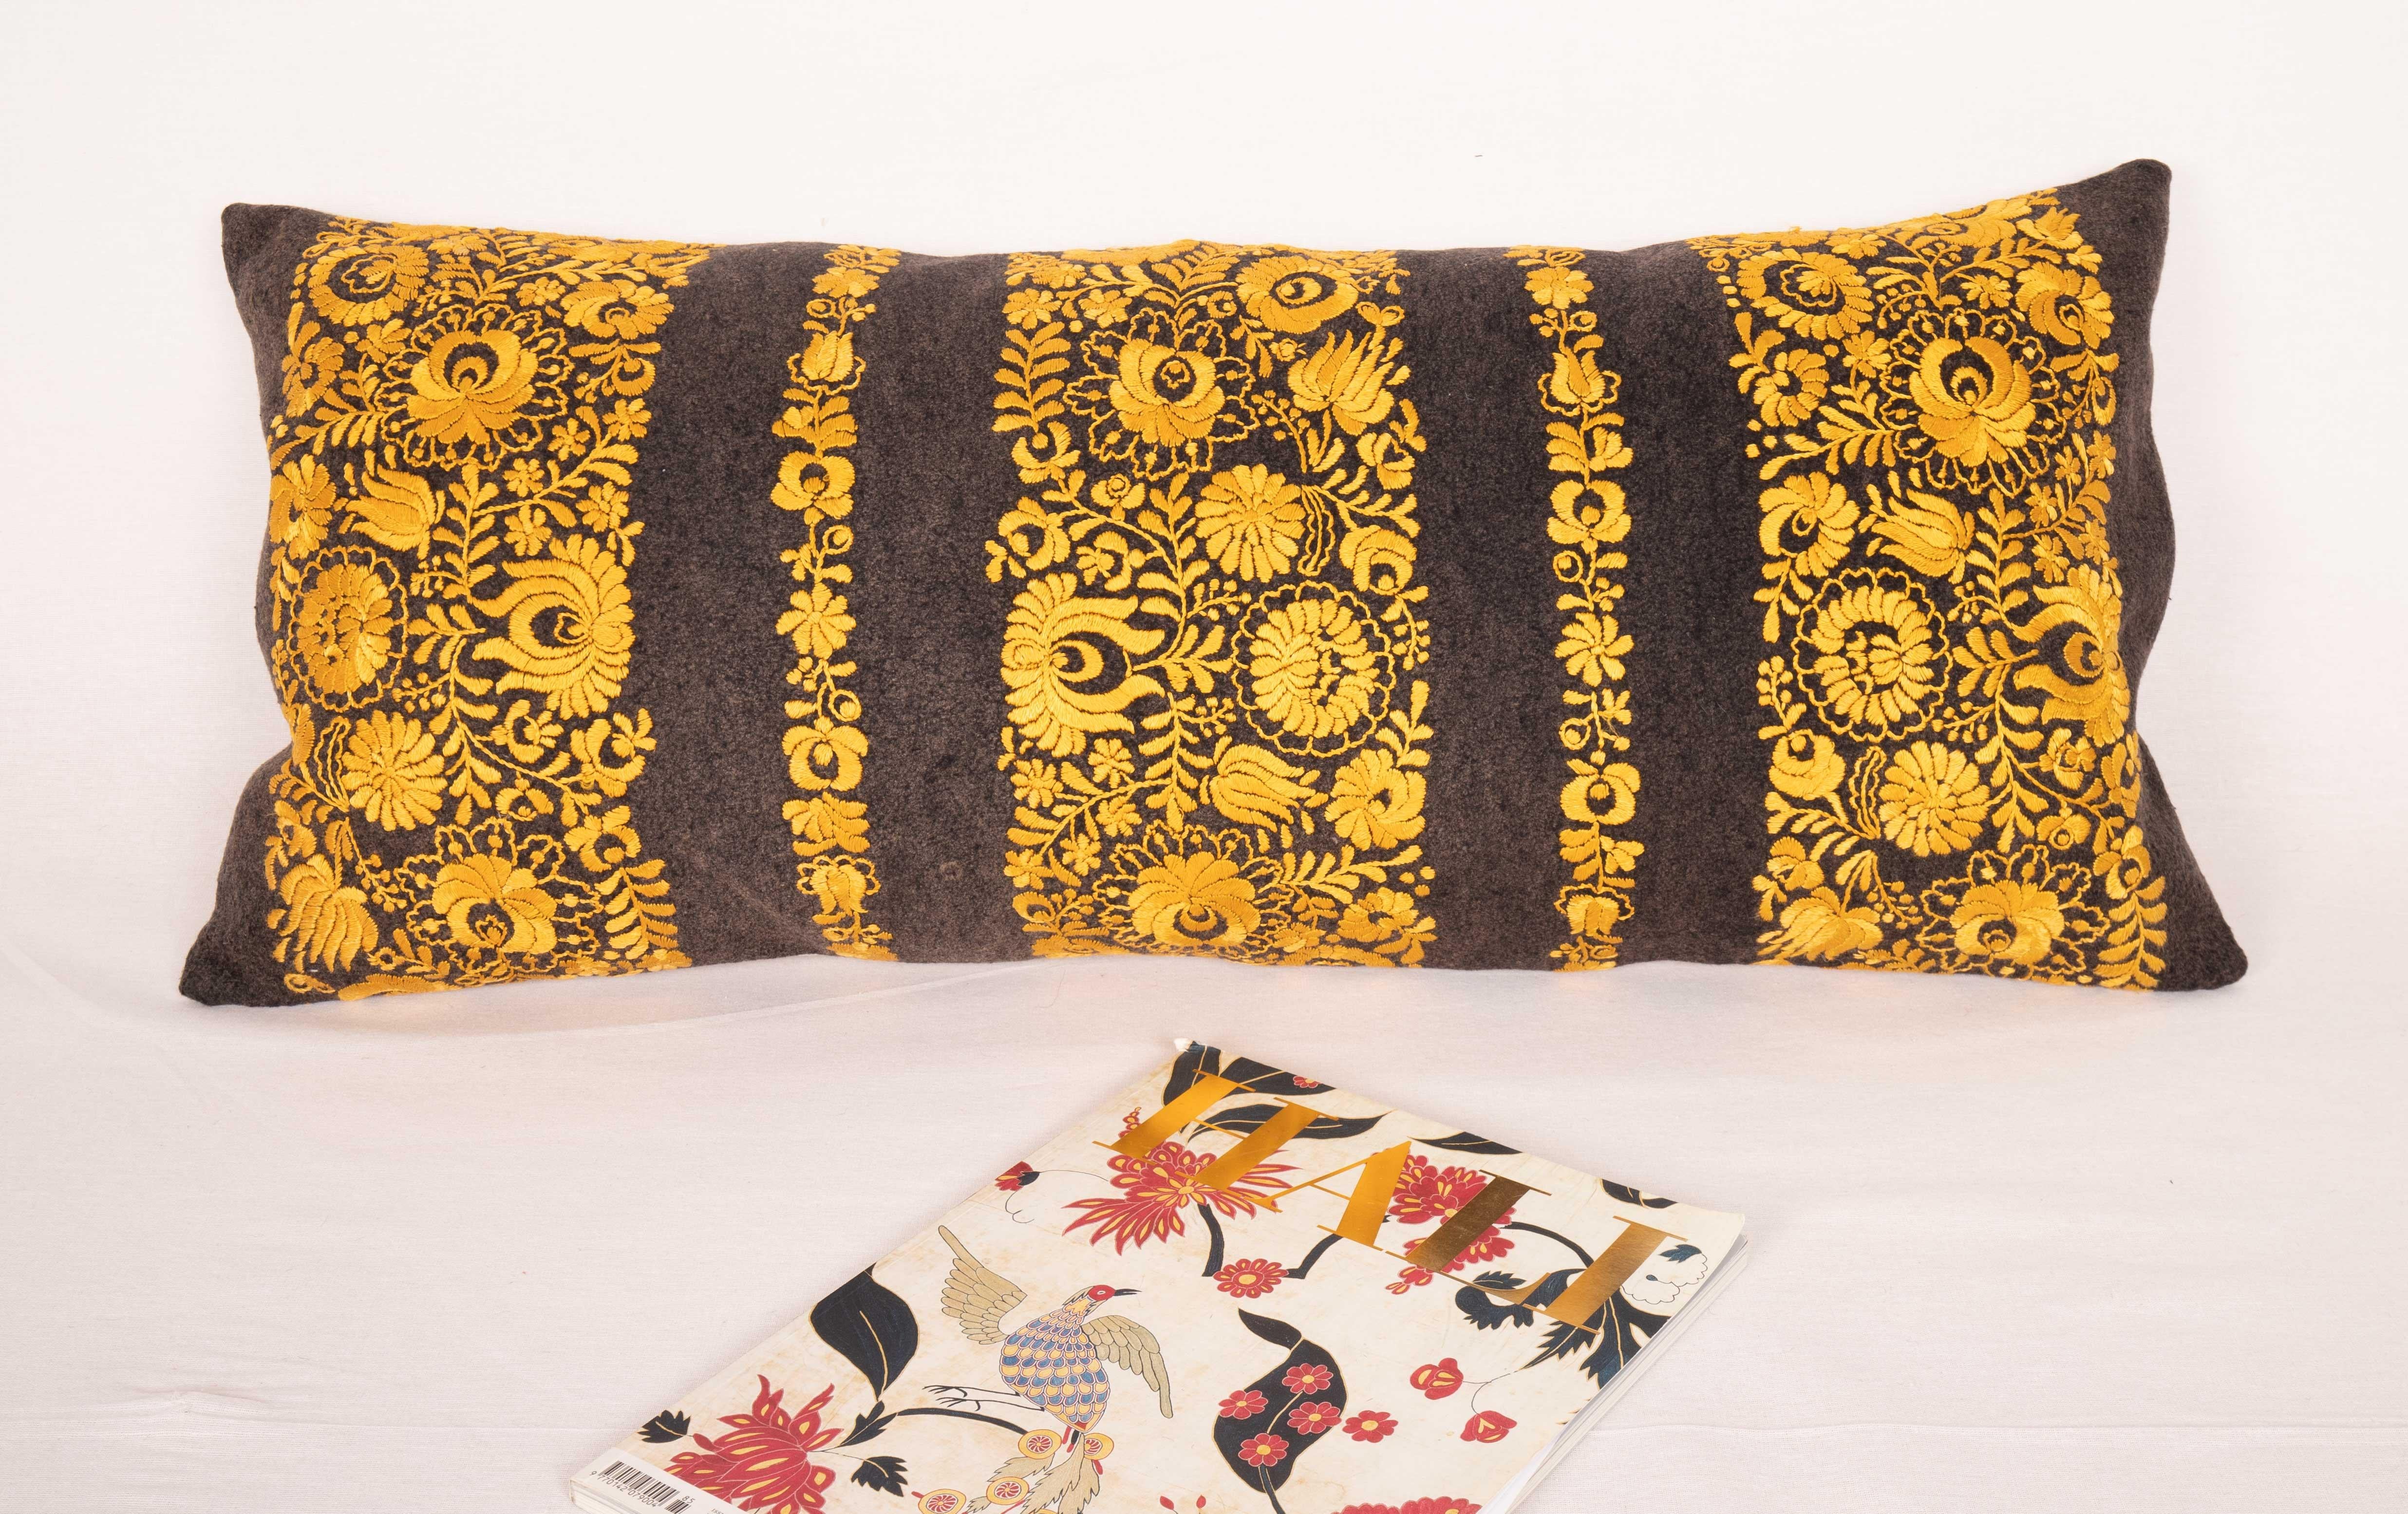 20th Century Hungarian Matyo Pillow Case, Early 20th C. For Sale